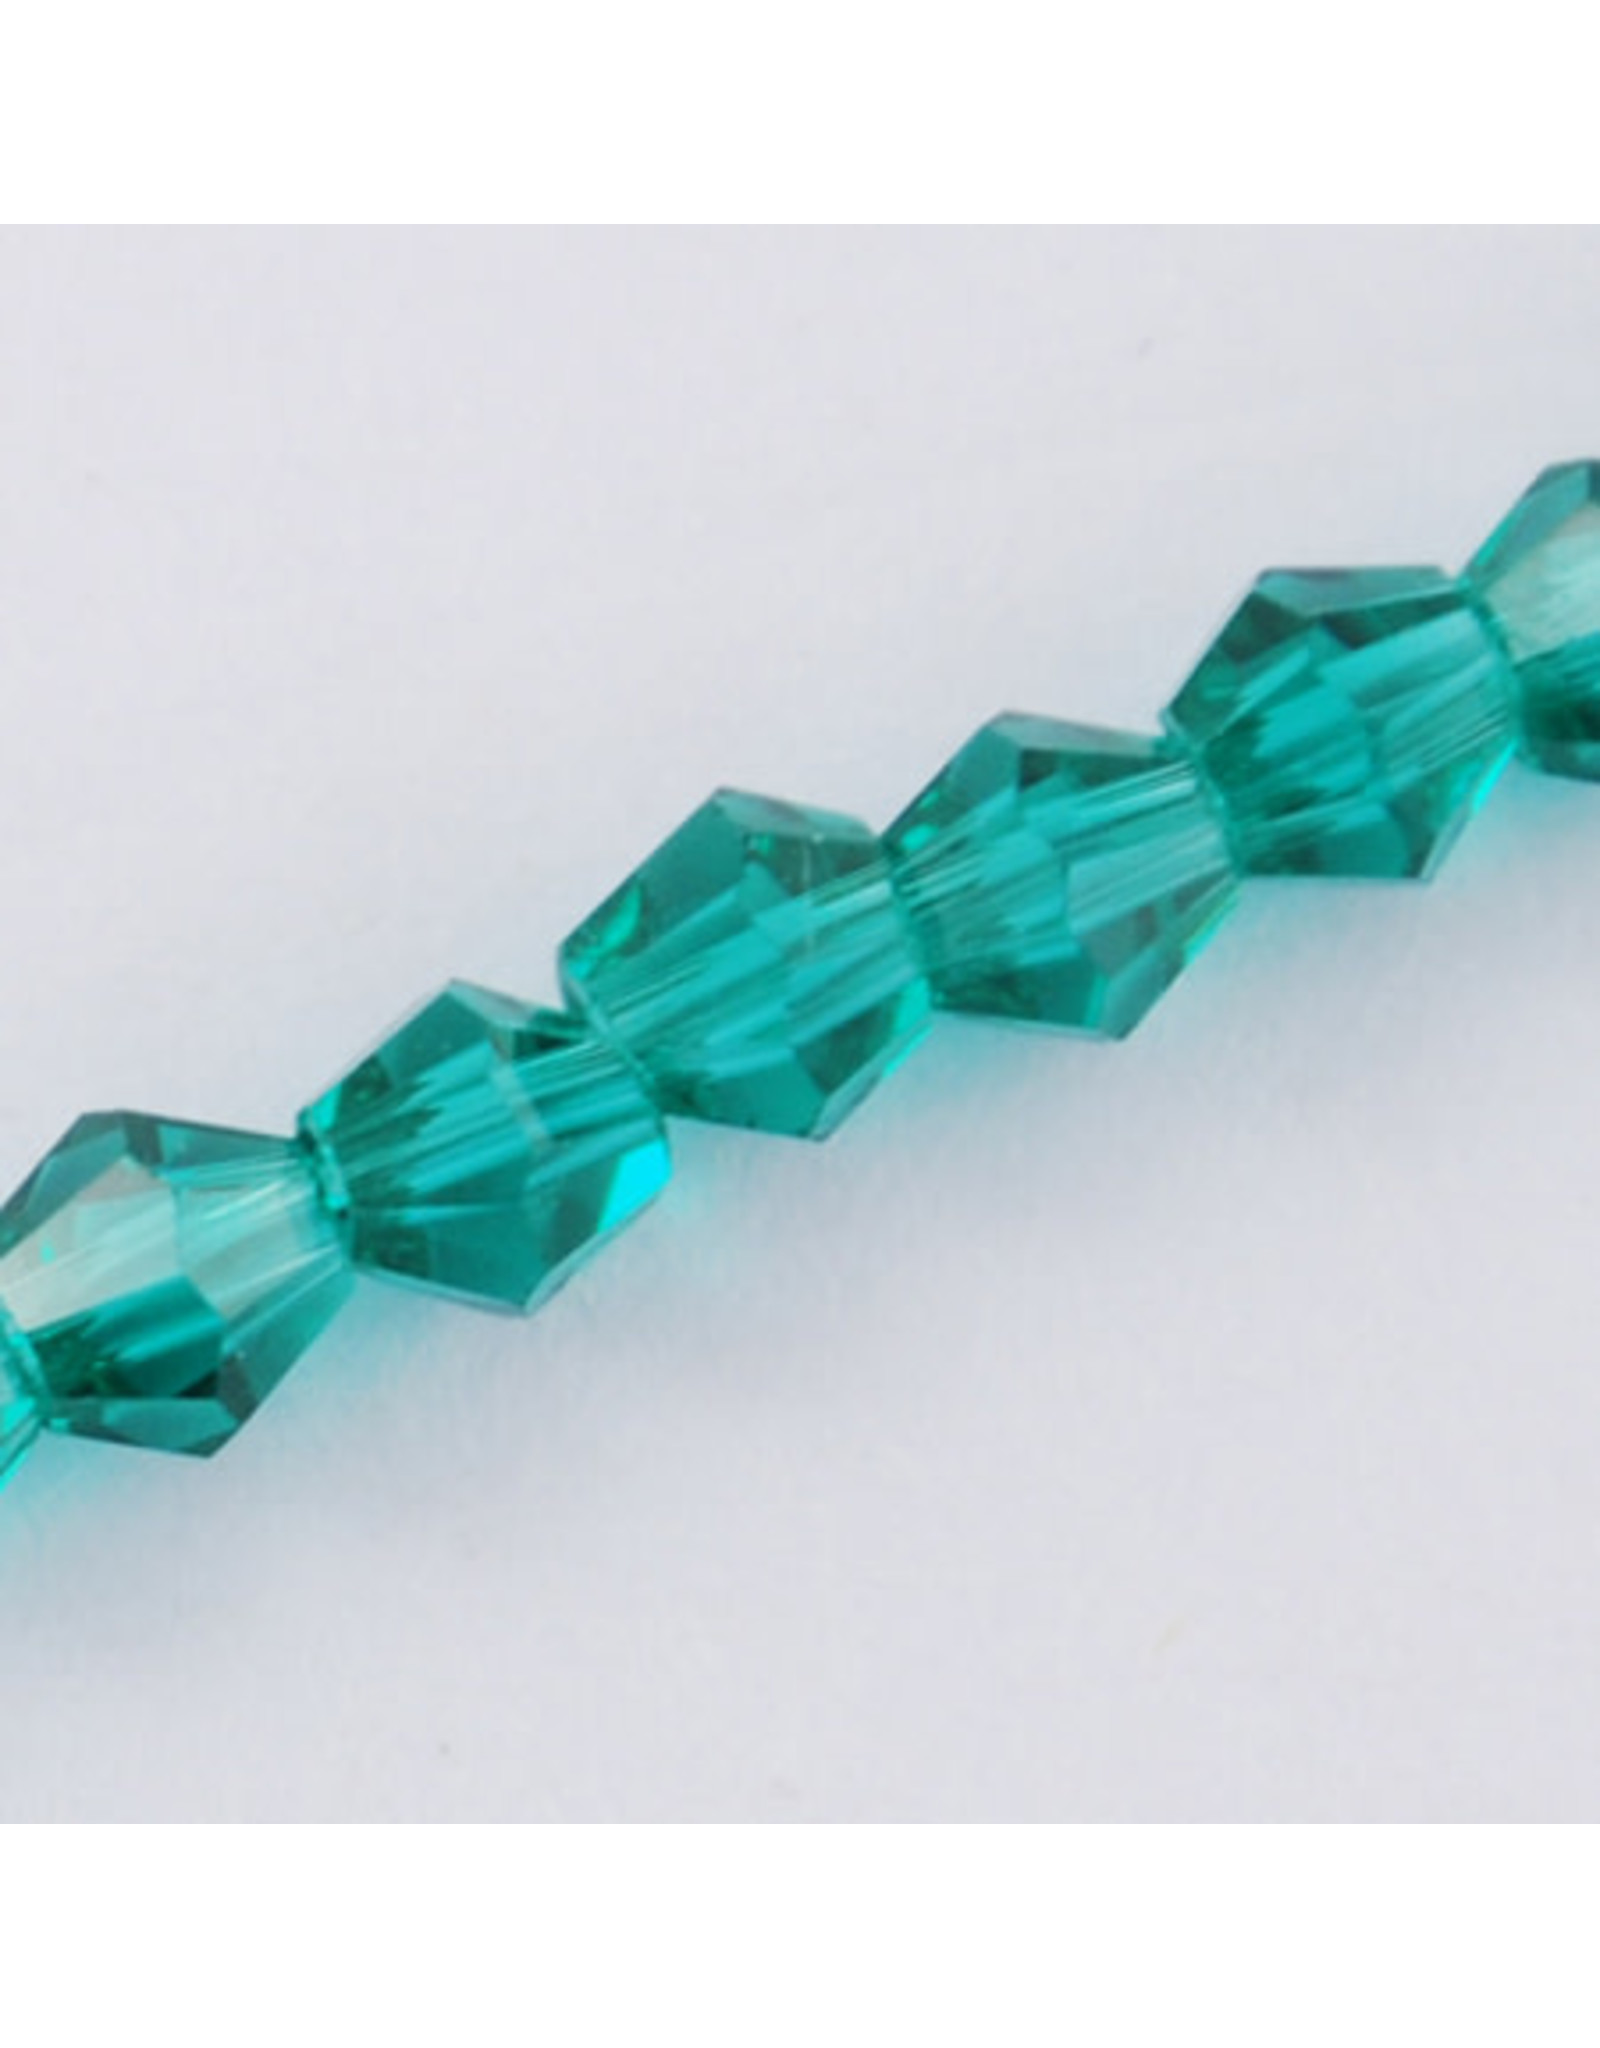 3mm Bicone Teal  x120